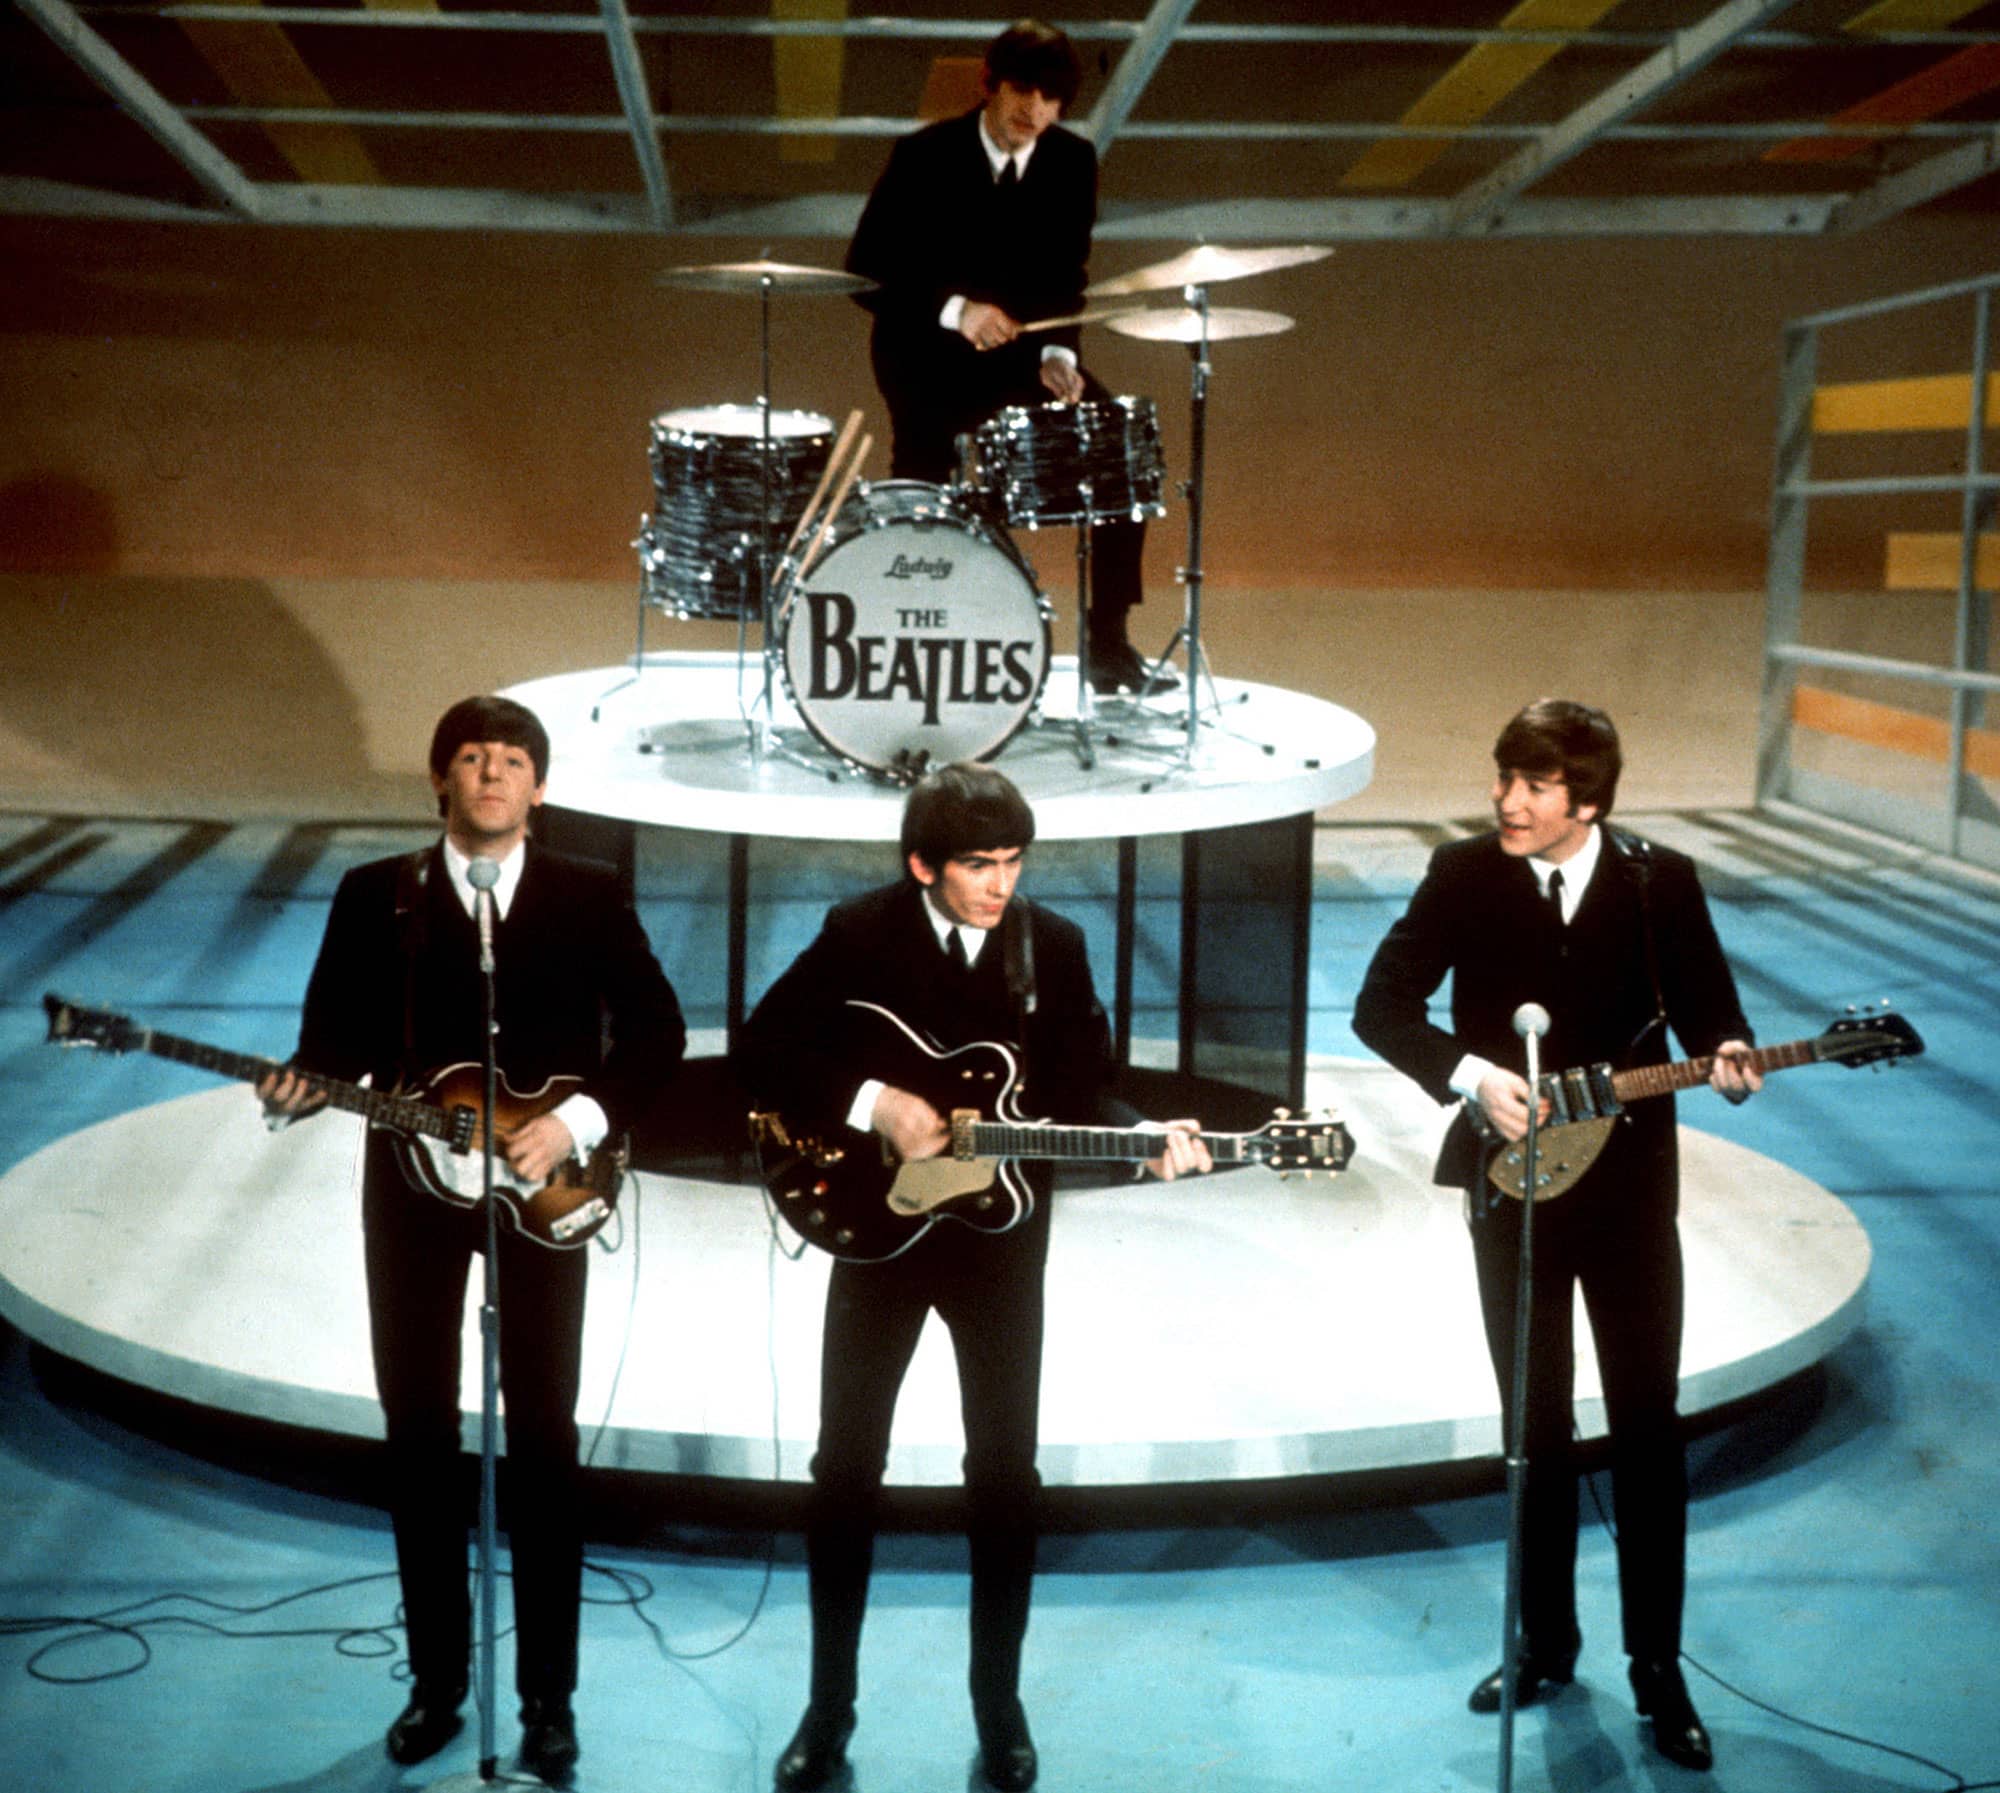 The Beatles' first Ed Sullivan Show – The Beatles Bible